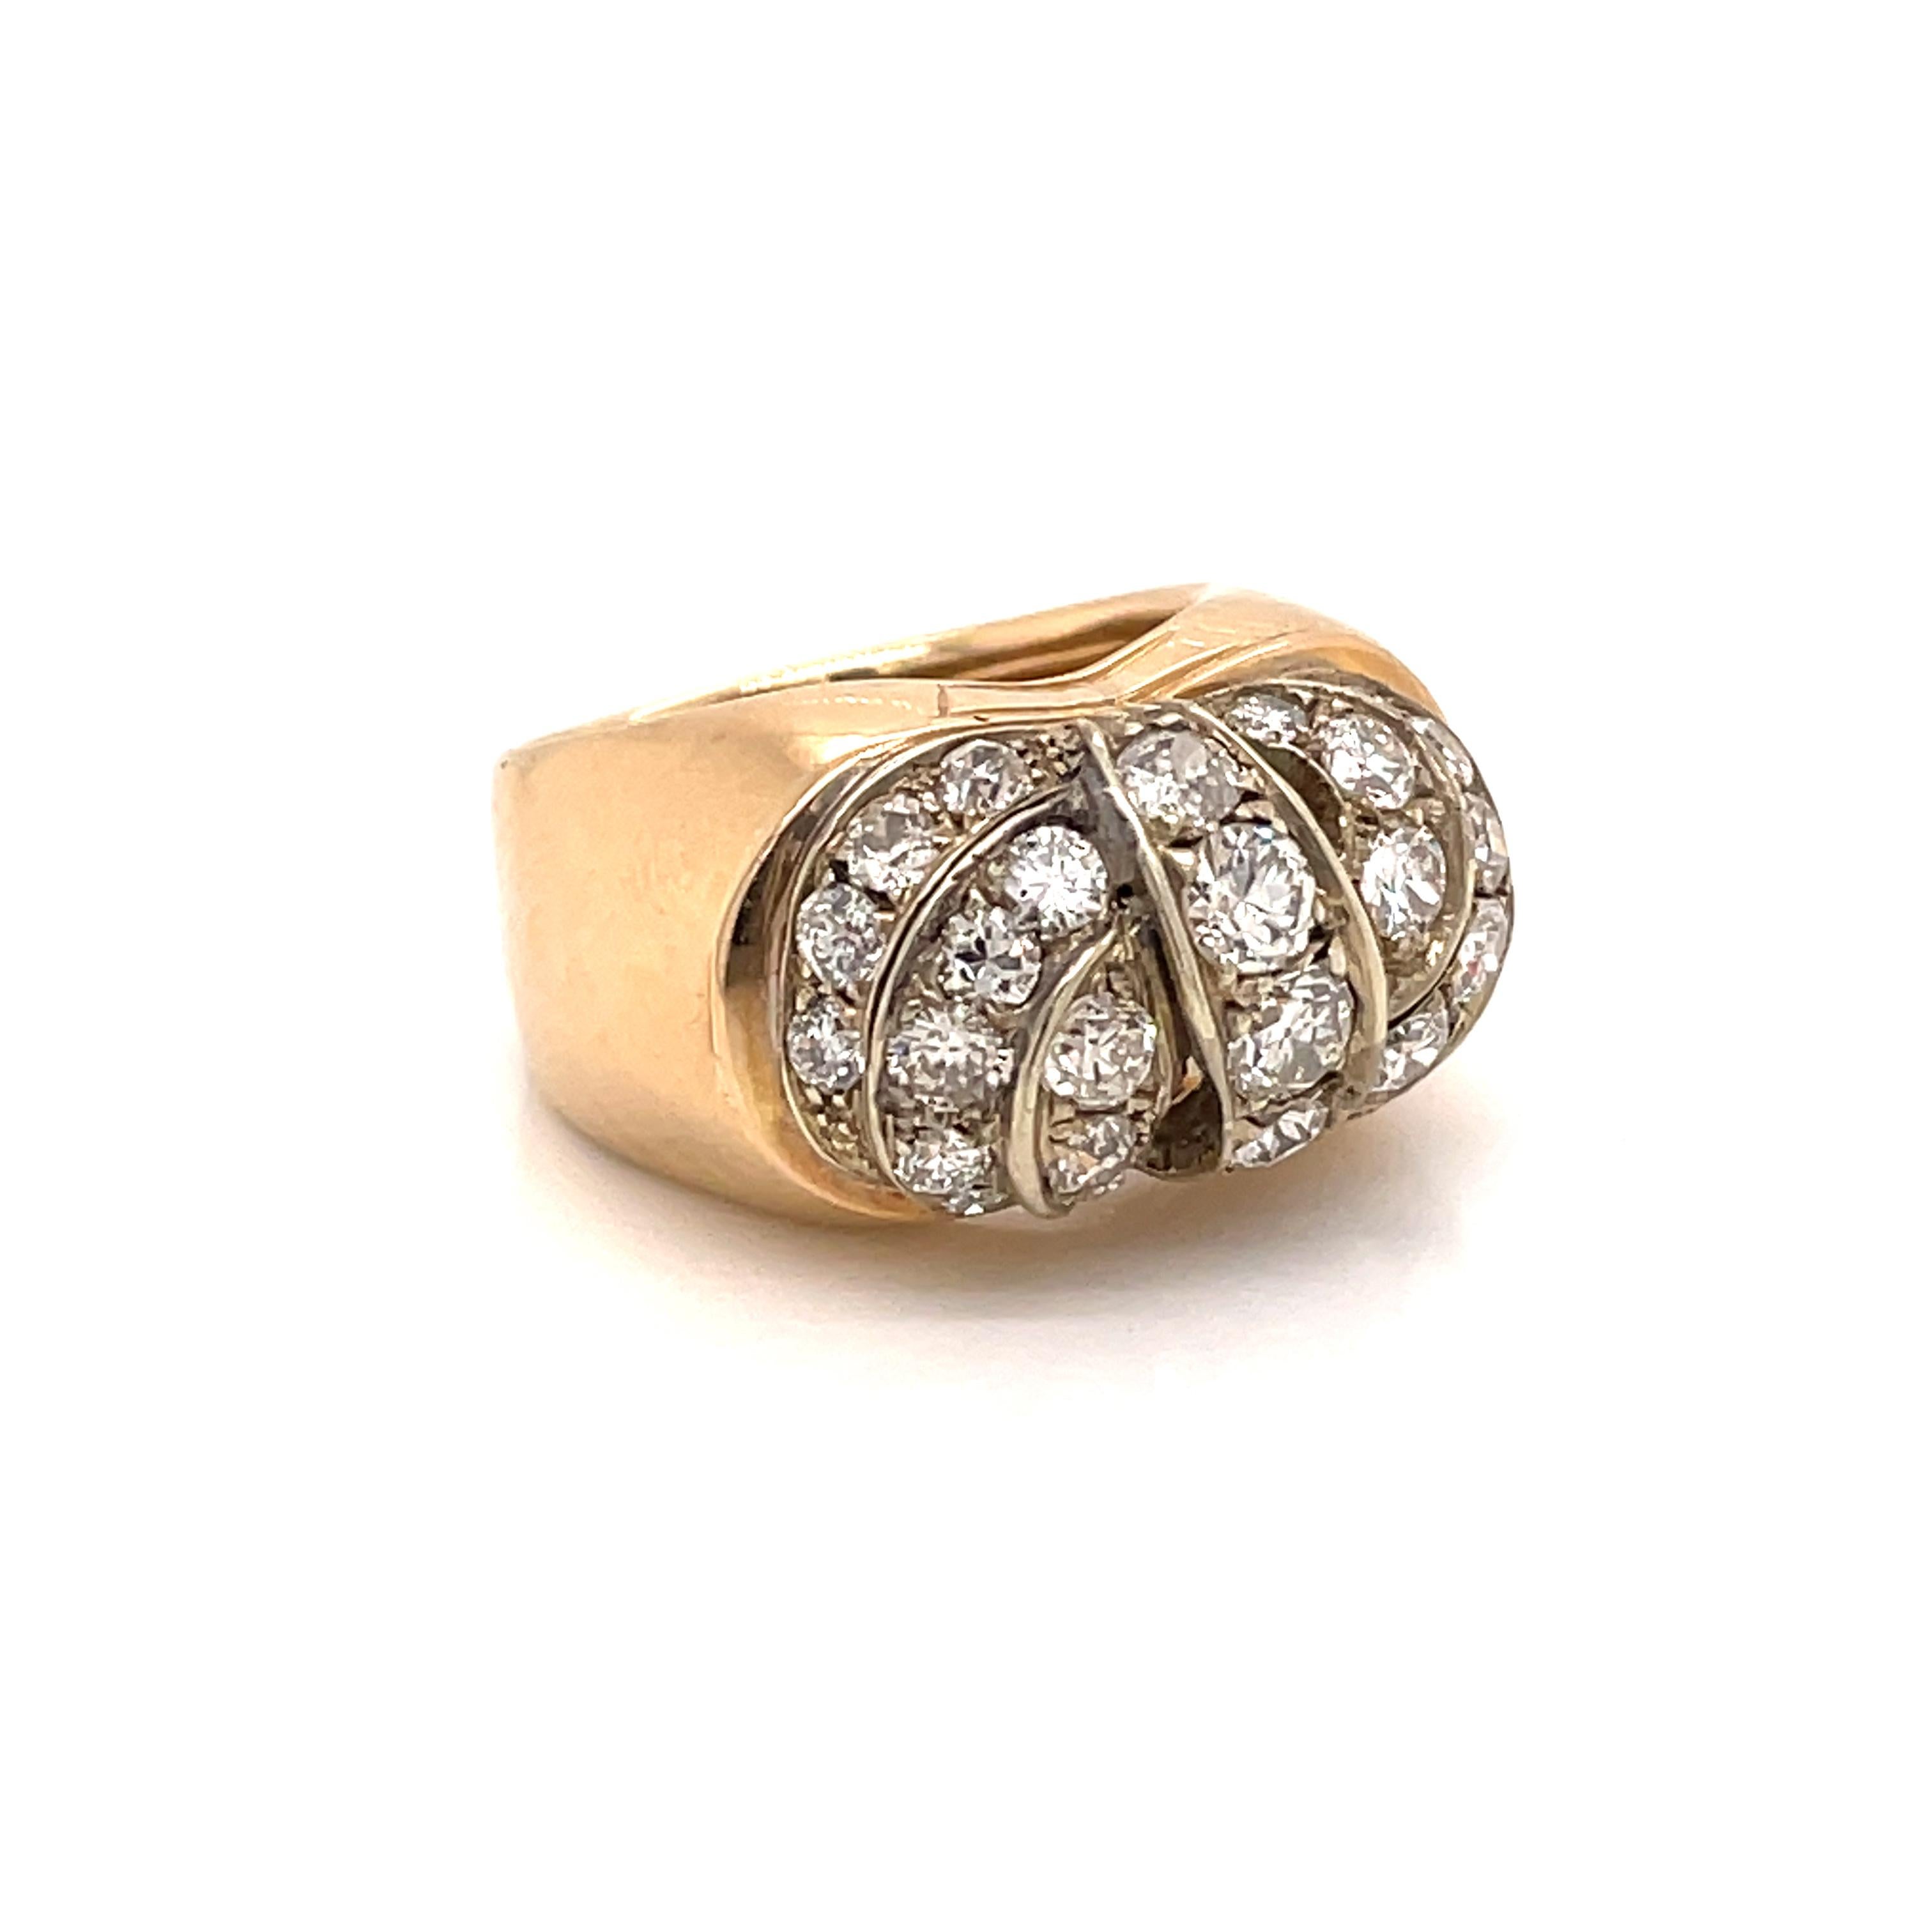 Retro 2.80 Carat Diamond Cocktail Gold Ring In Excellent Condition For Sale In Napoli, Italy